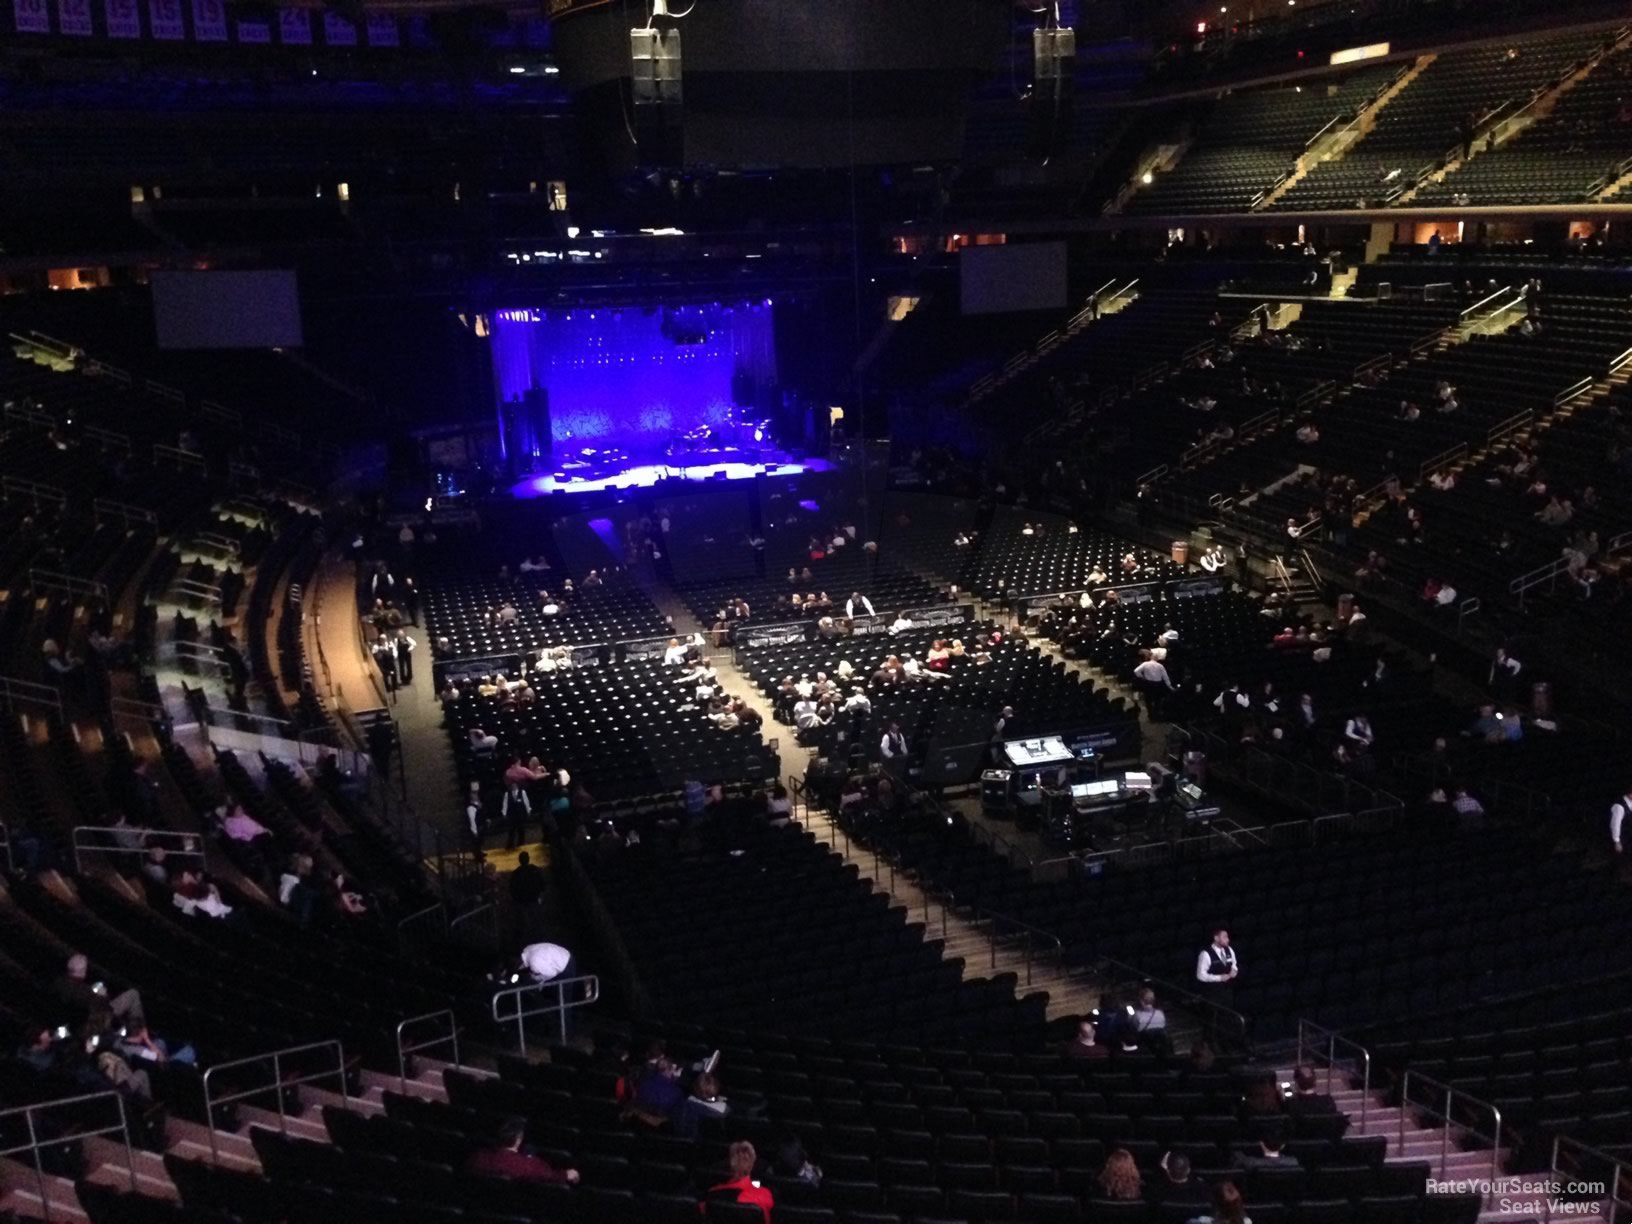 section 203, row 2 seat view  for concert - madison square garden